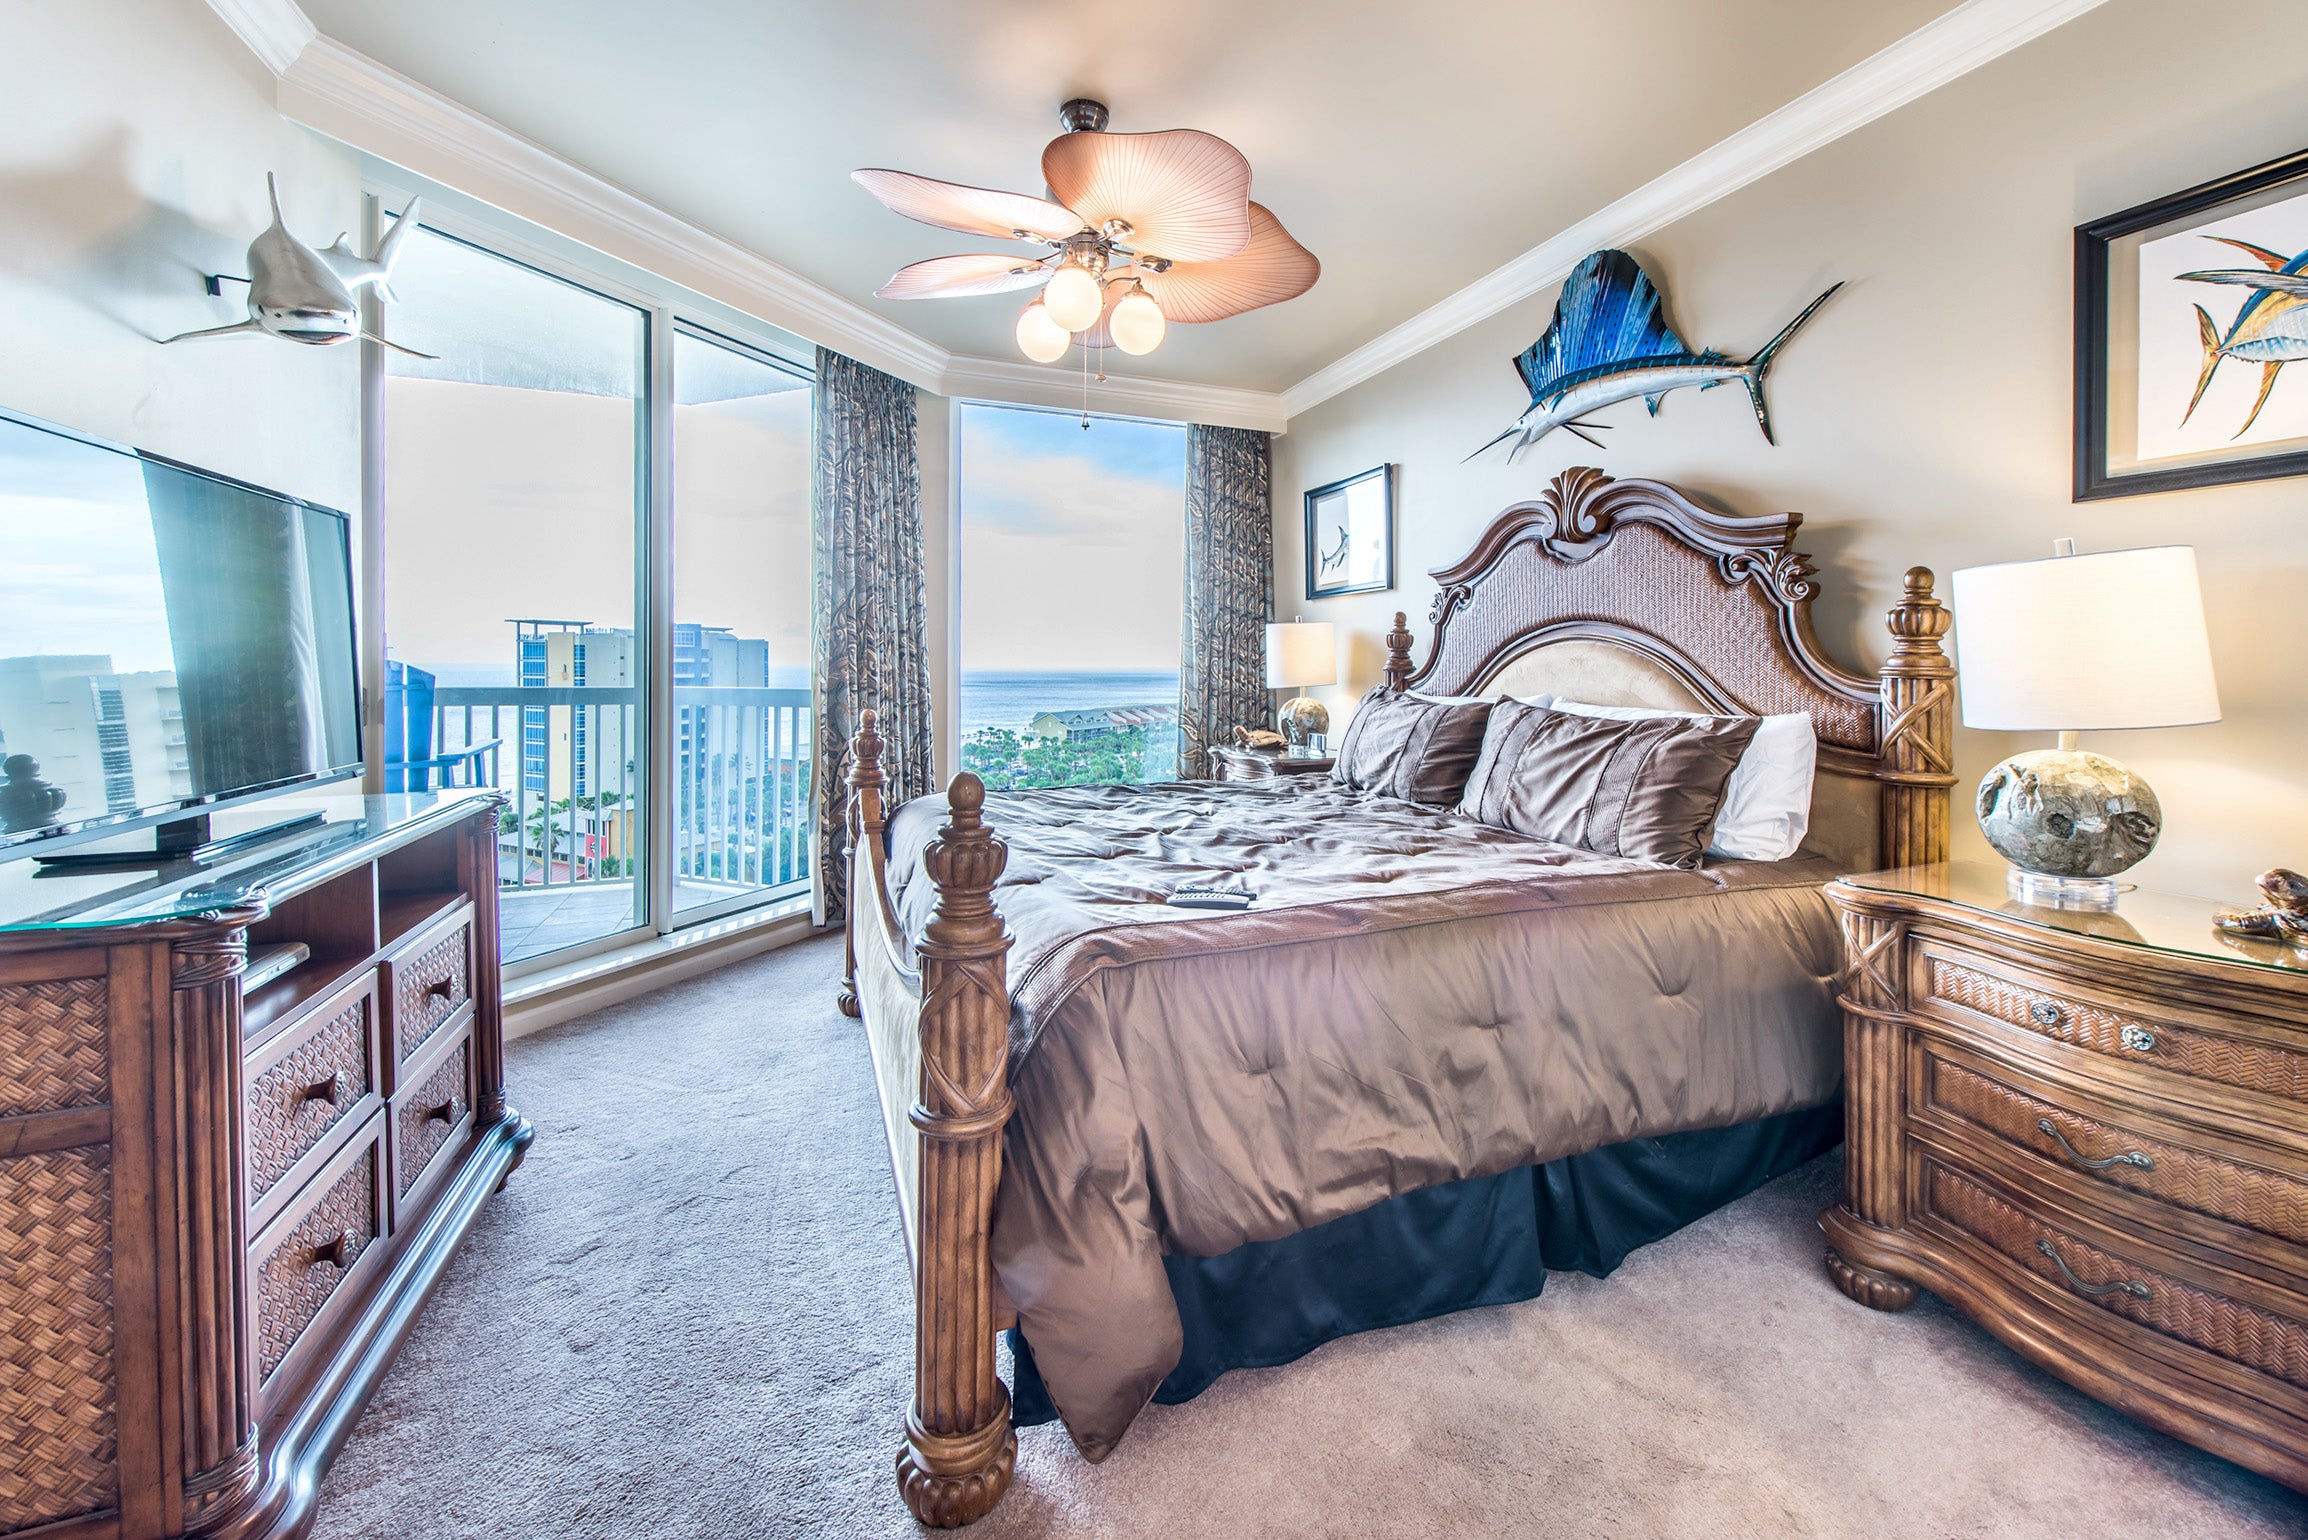 Grand Master bedroom with balcony access